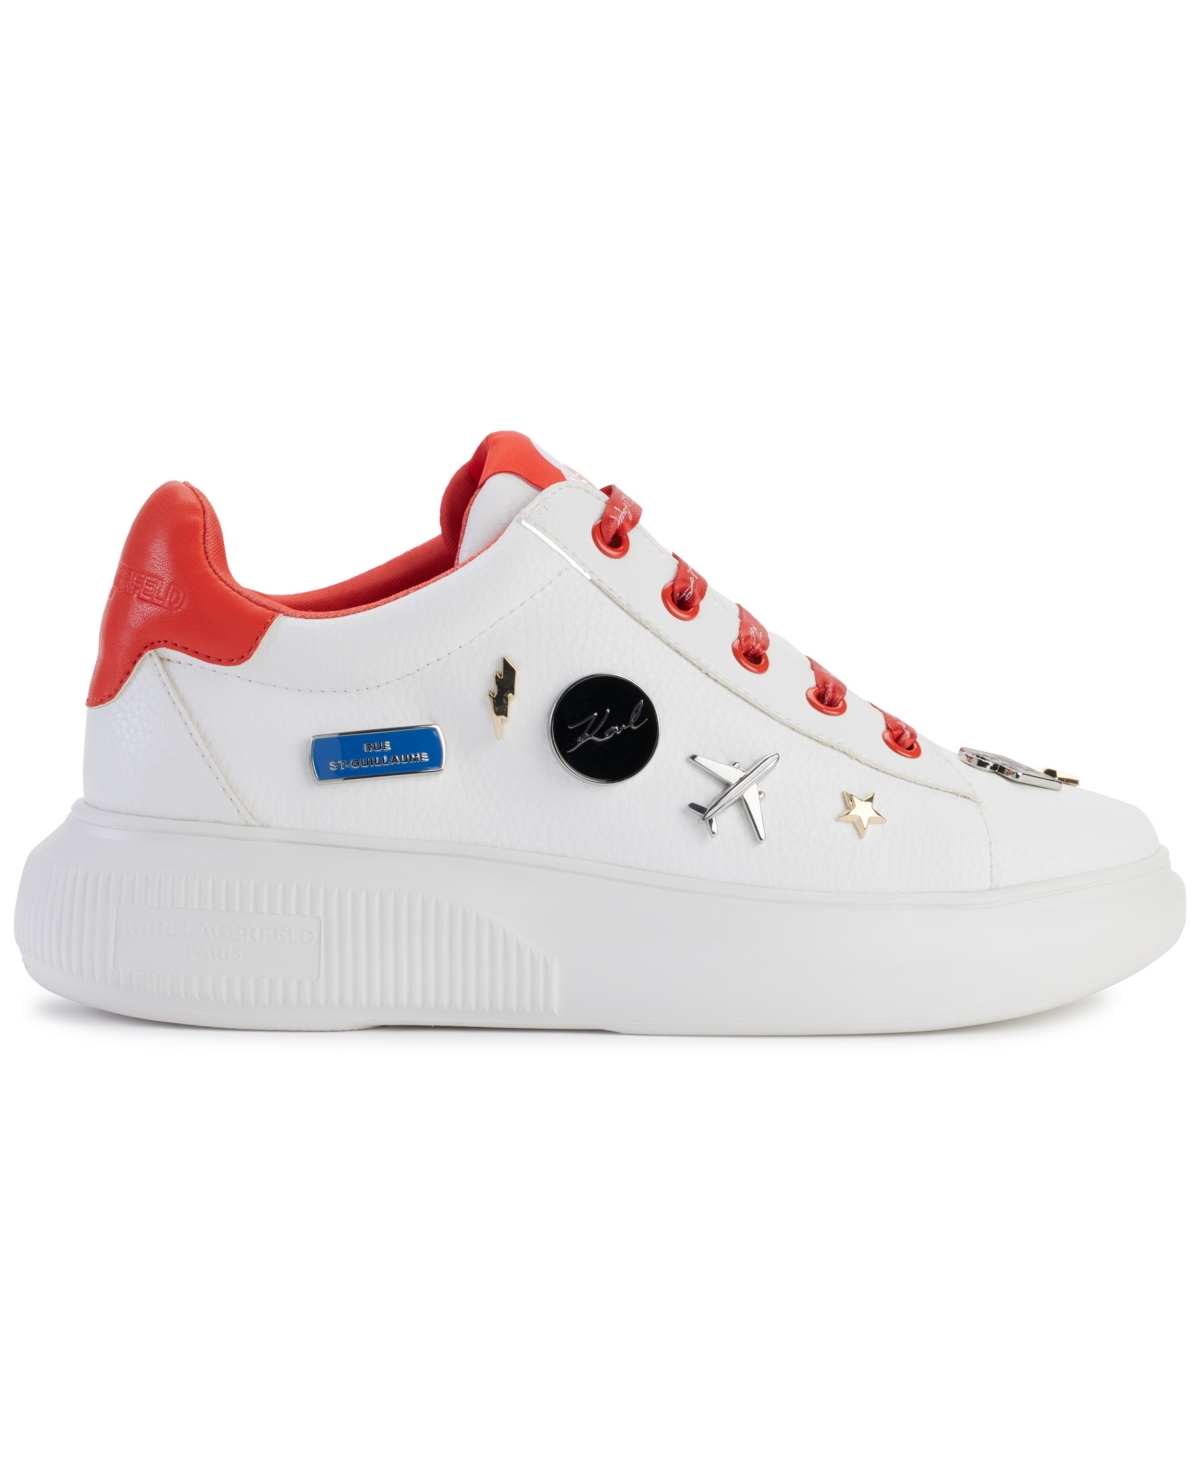 Shop Karl Lagerfeld Justina Lace Up Platform Sneakers In Bright White,black